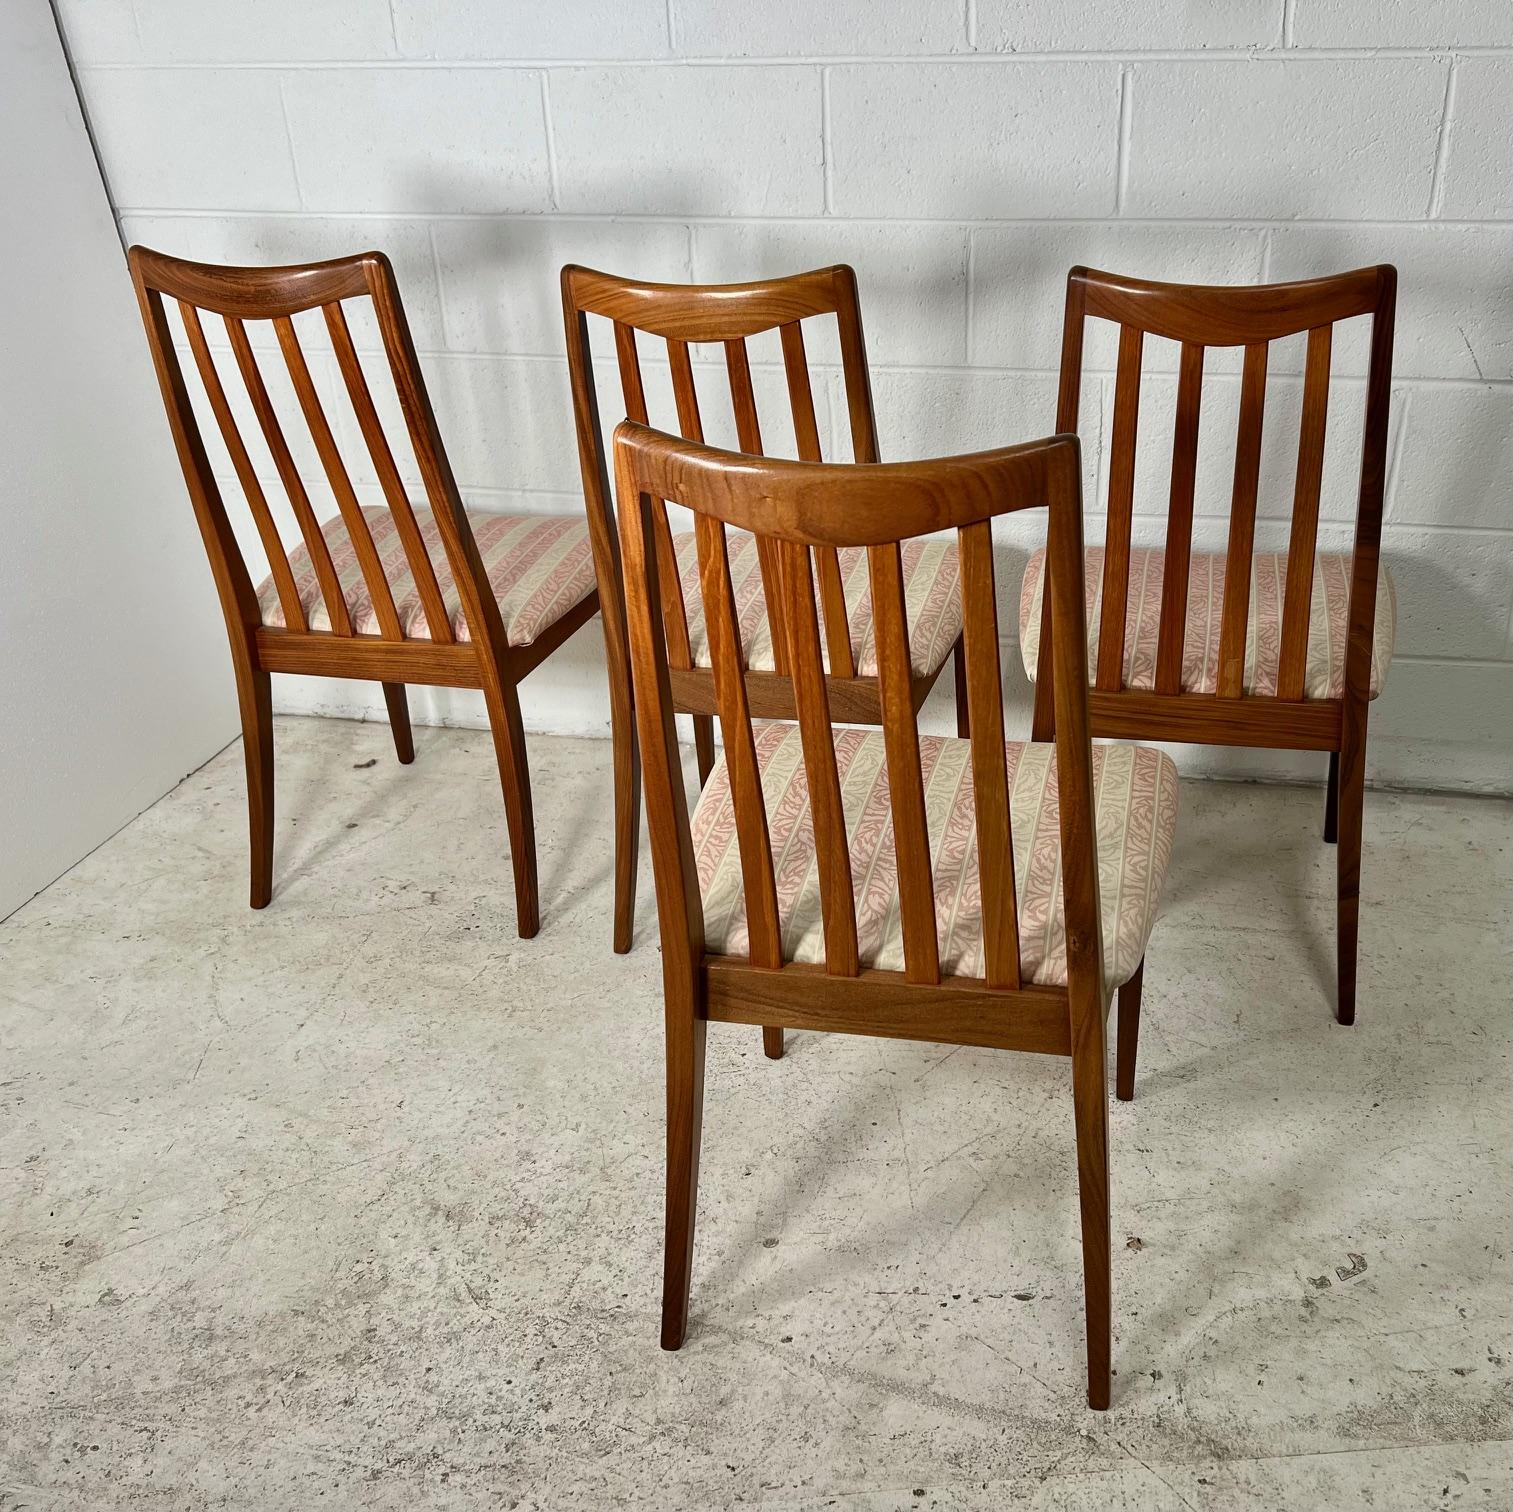 20th Century Set Of 6 Mid Century Modern Teak Chairs By G Plan Slat Back  2 With Arms